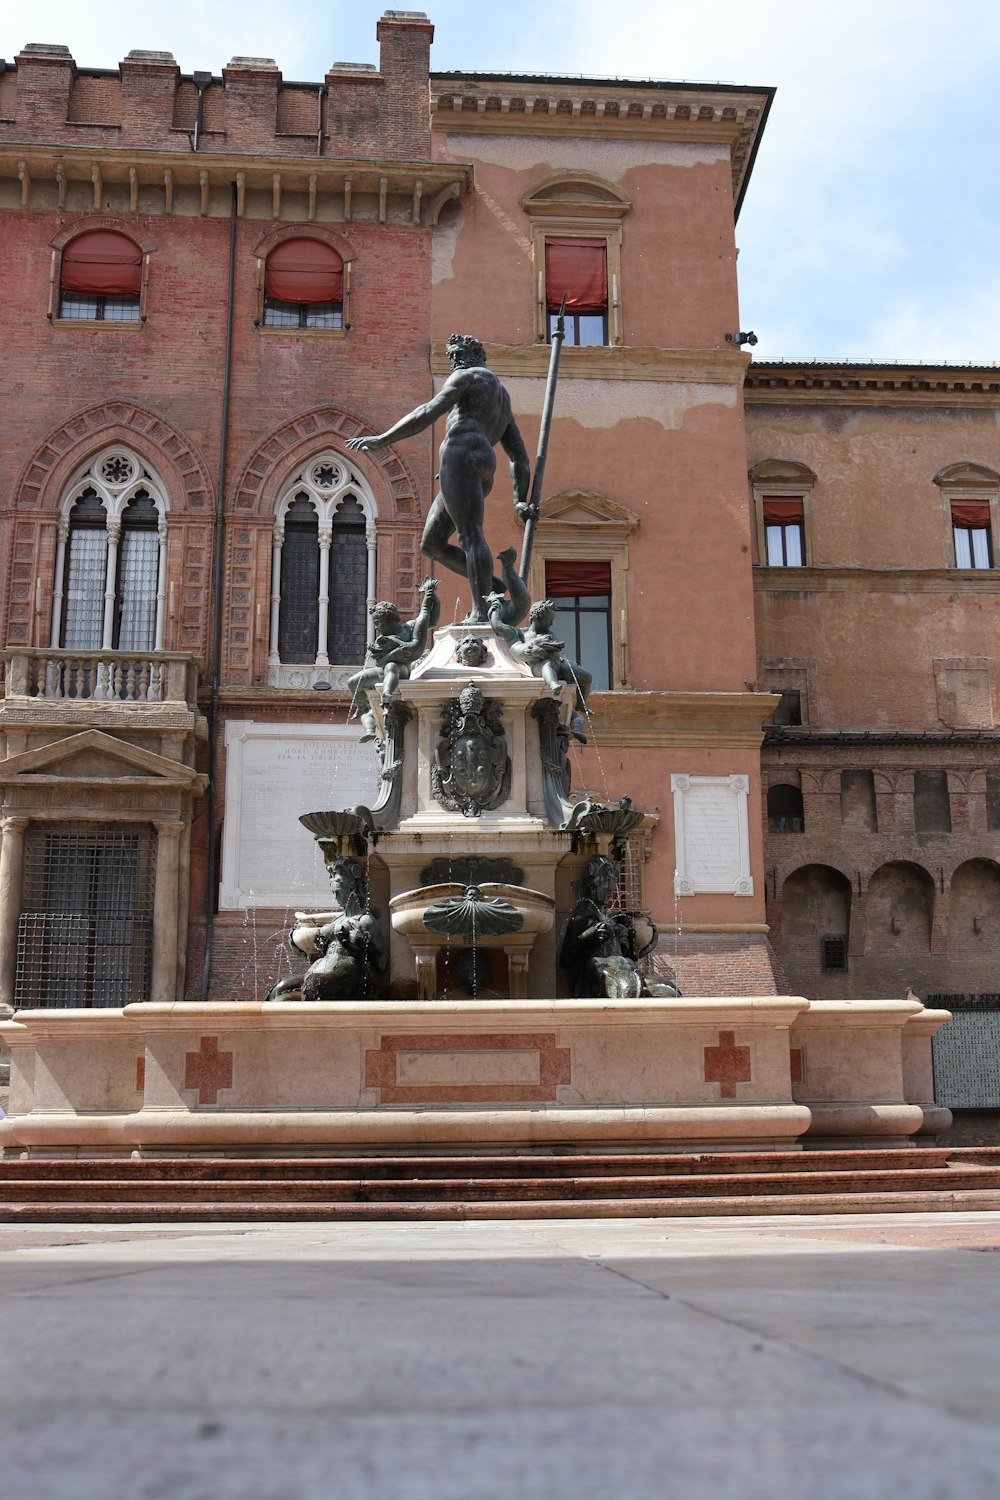 a statue of a person holding a spear in front of a building